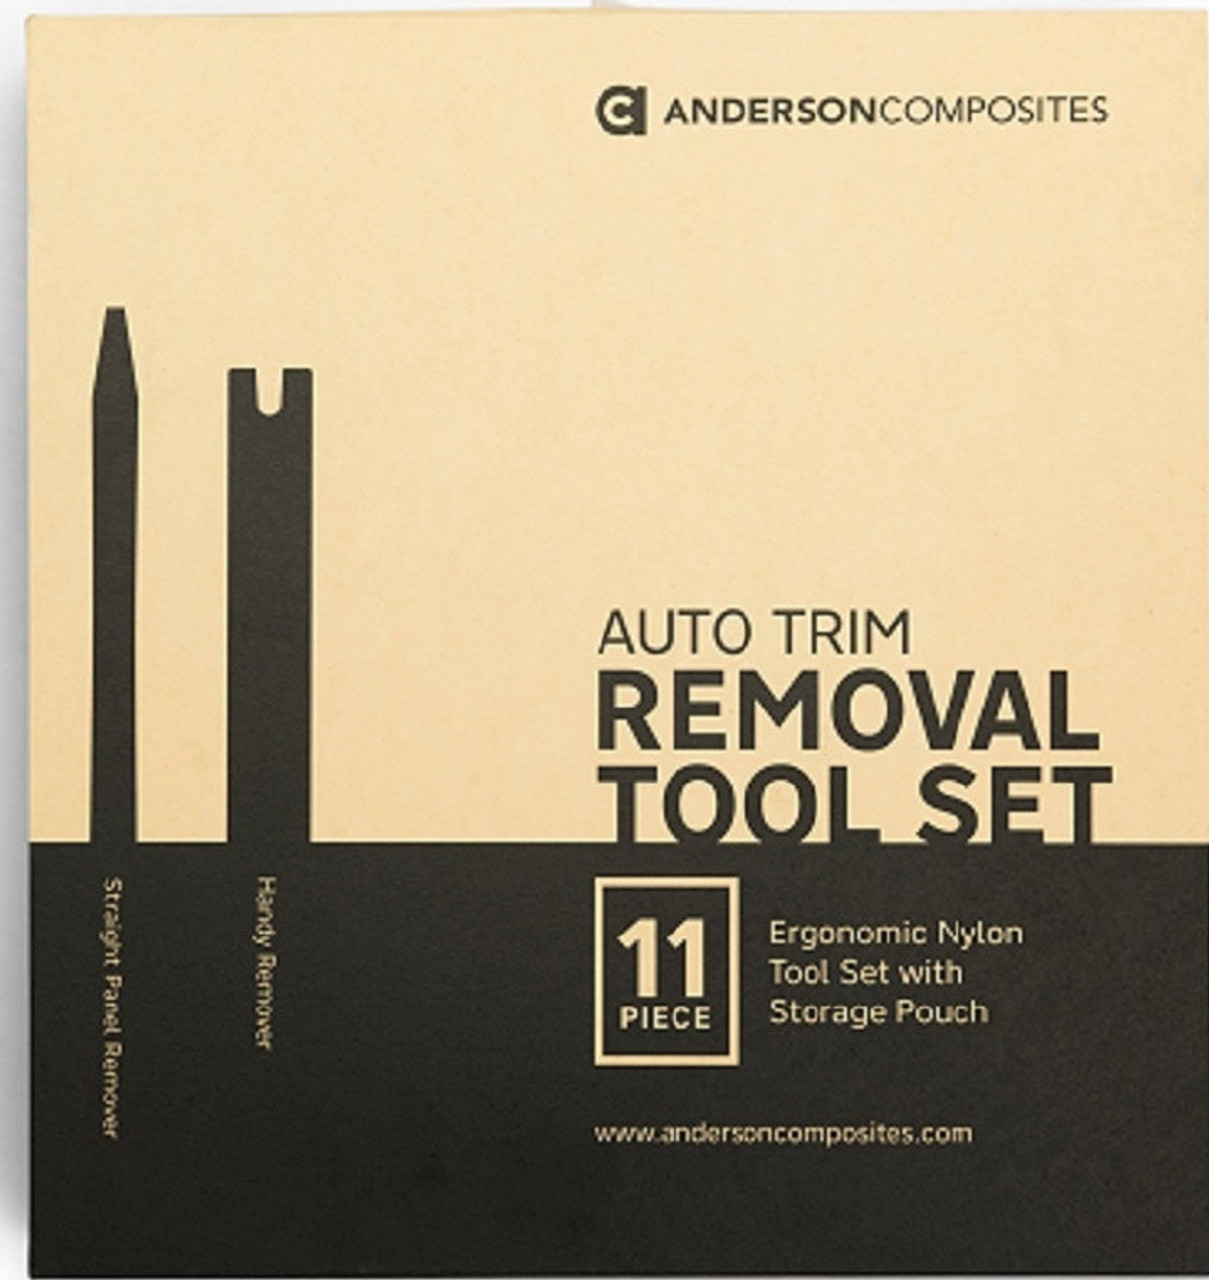 https://cdn11.bigcommerce.com/s-mpjjgudg9o/images/stencil/1280x1280/products/772/4056/automotive_trim_and_panel_removal_tool_set_-_yythkg_2__1__83632.1661194841.jpg?c=1